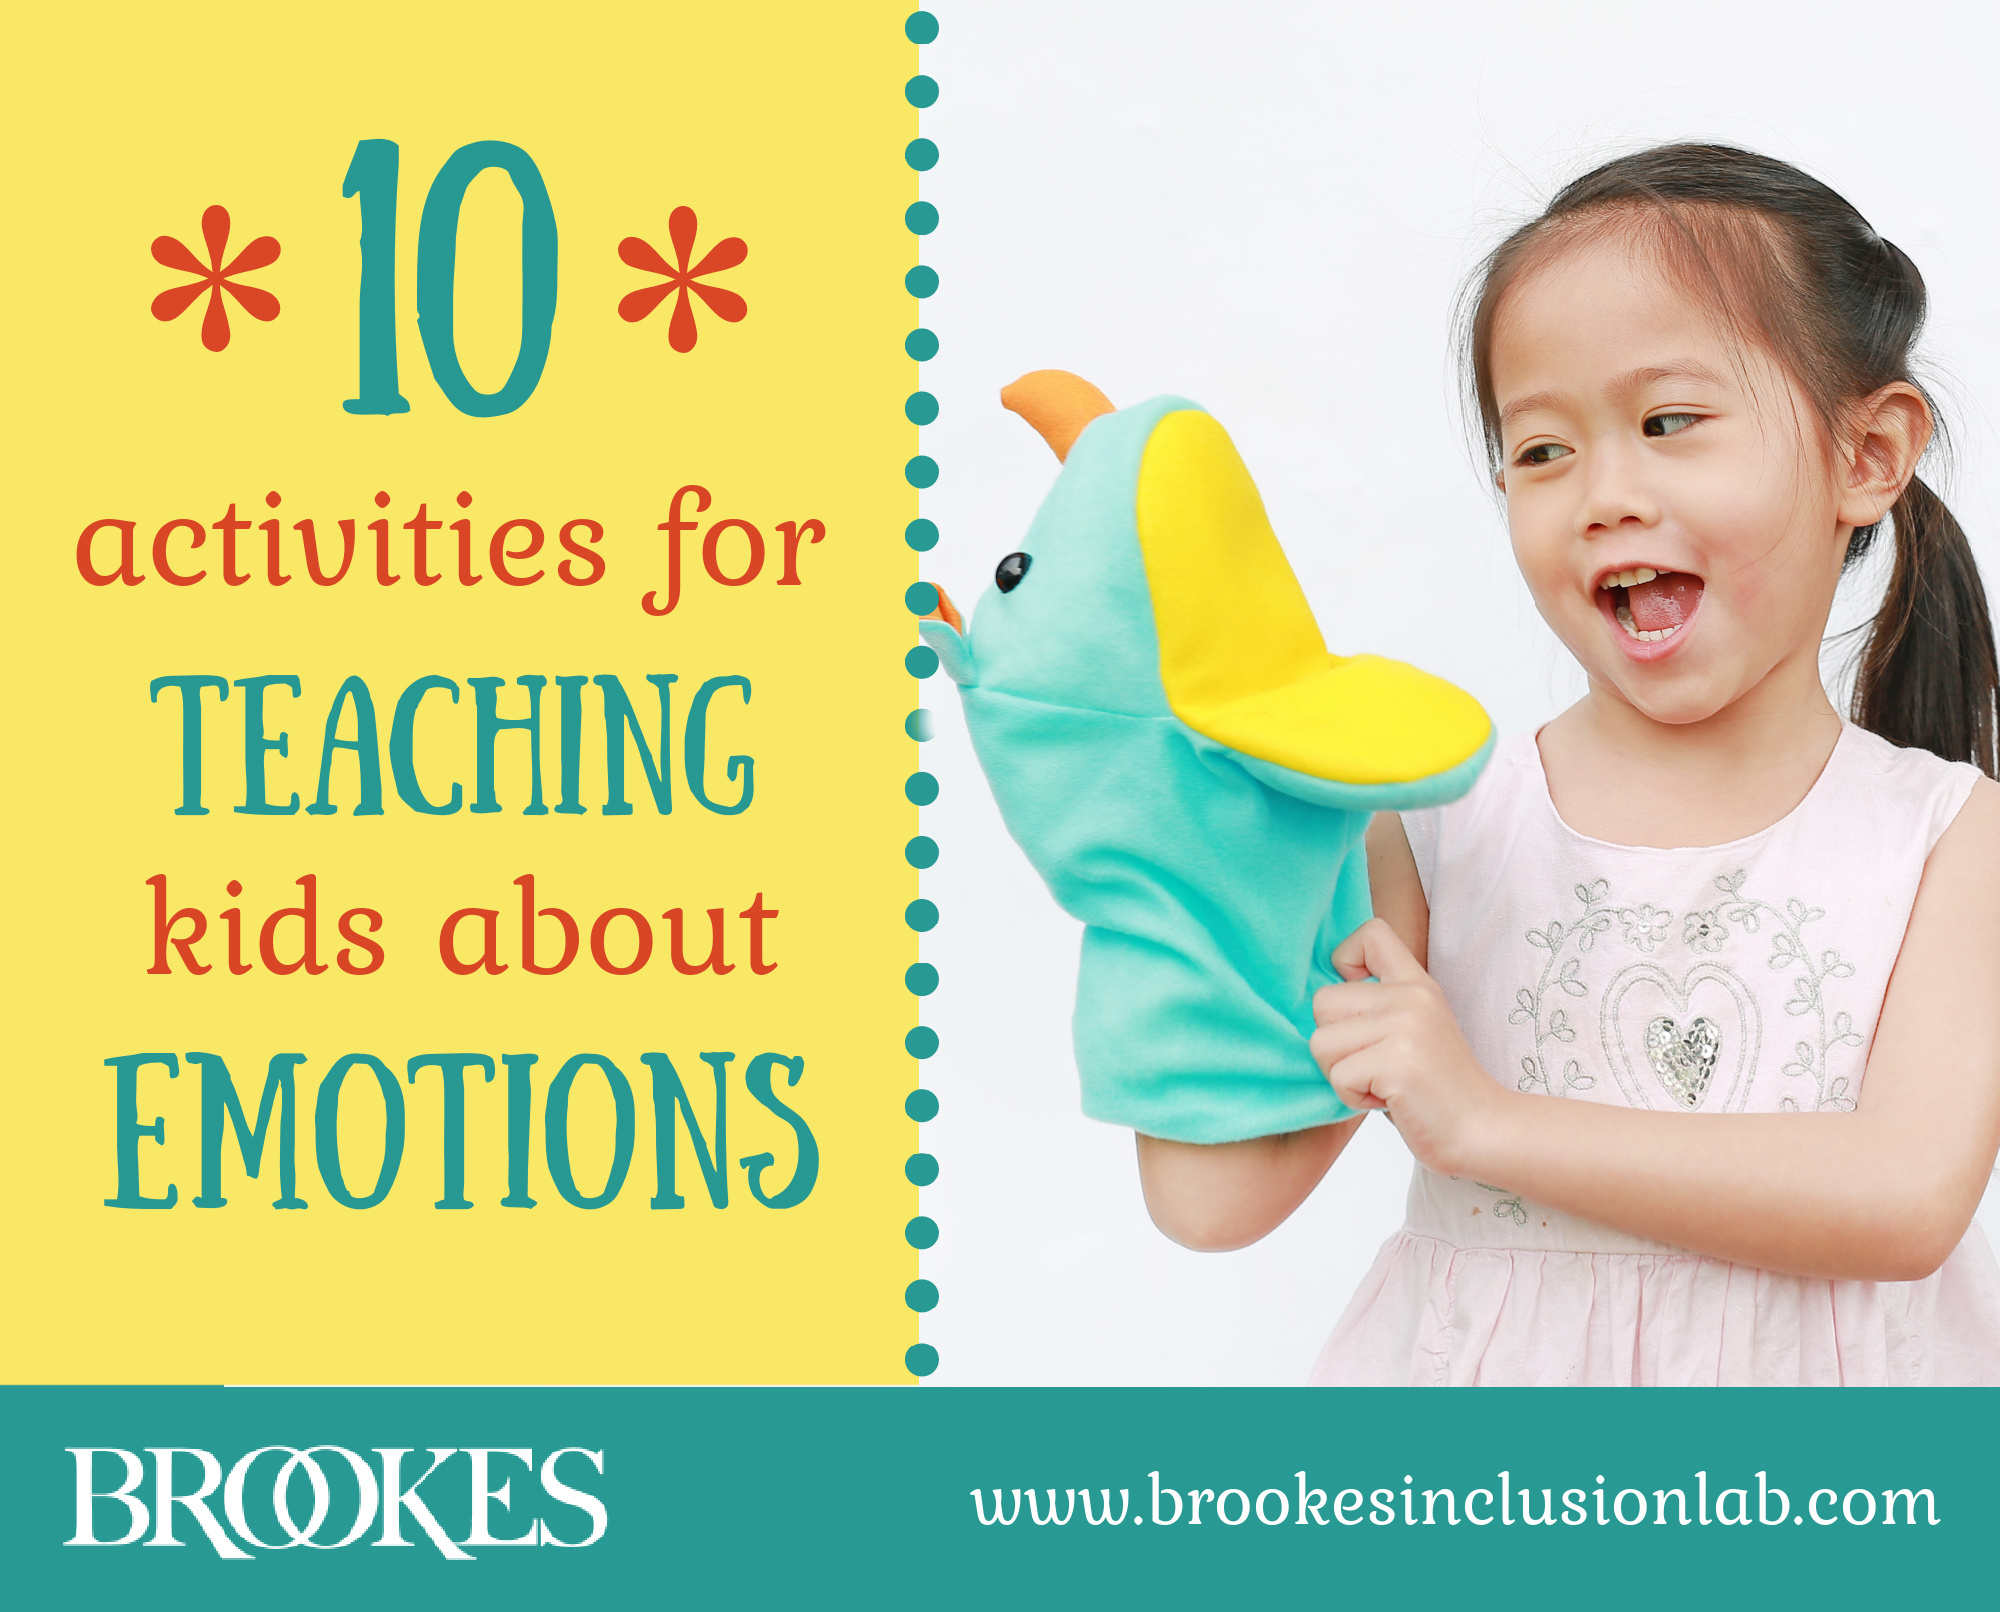 Emotions for Kids: How to Talk About Big Feelings With Small Children